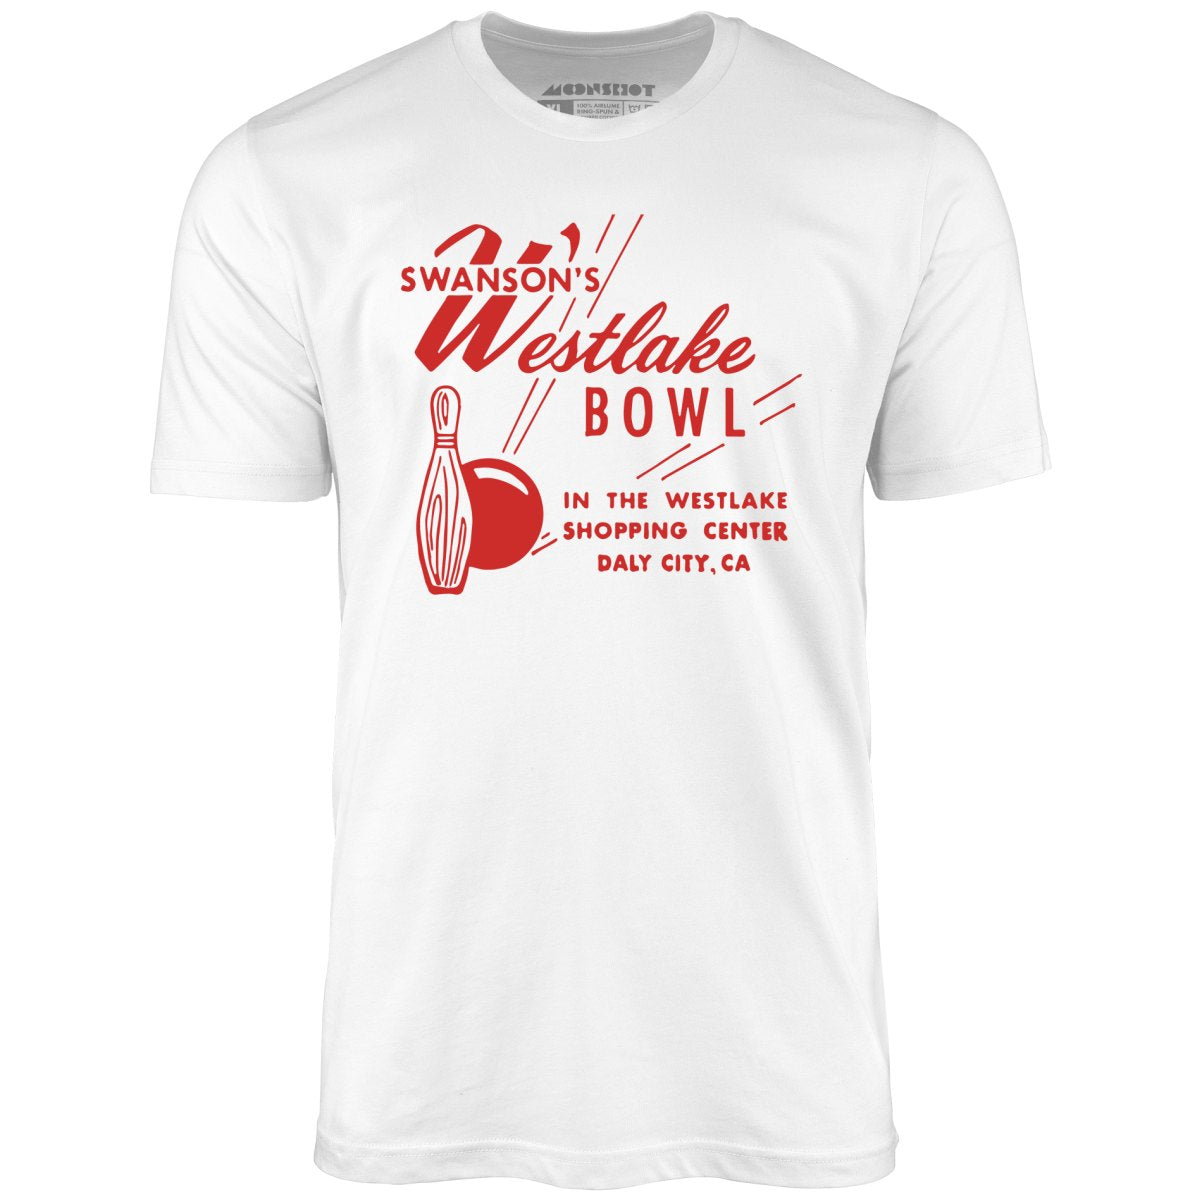 Swanson's Westlake Bowl - Daly City, CA - Vintage Bowling Alley - Unisex T-Shirt